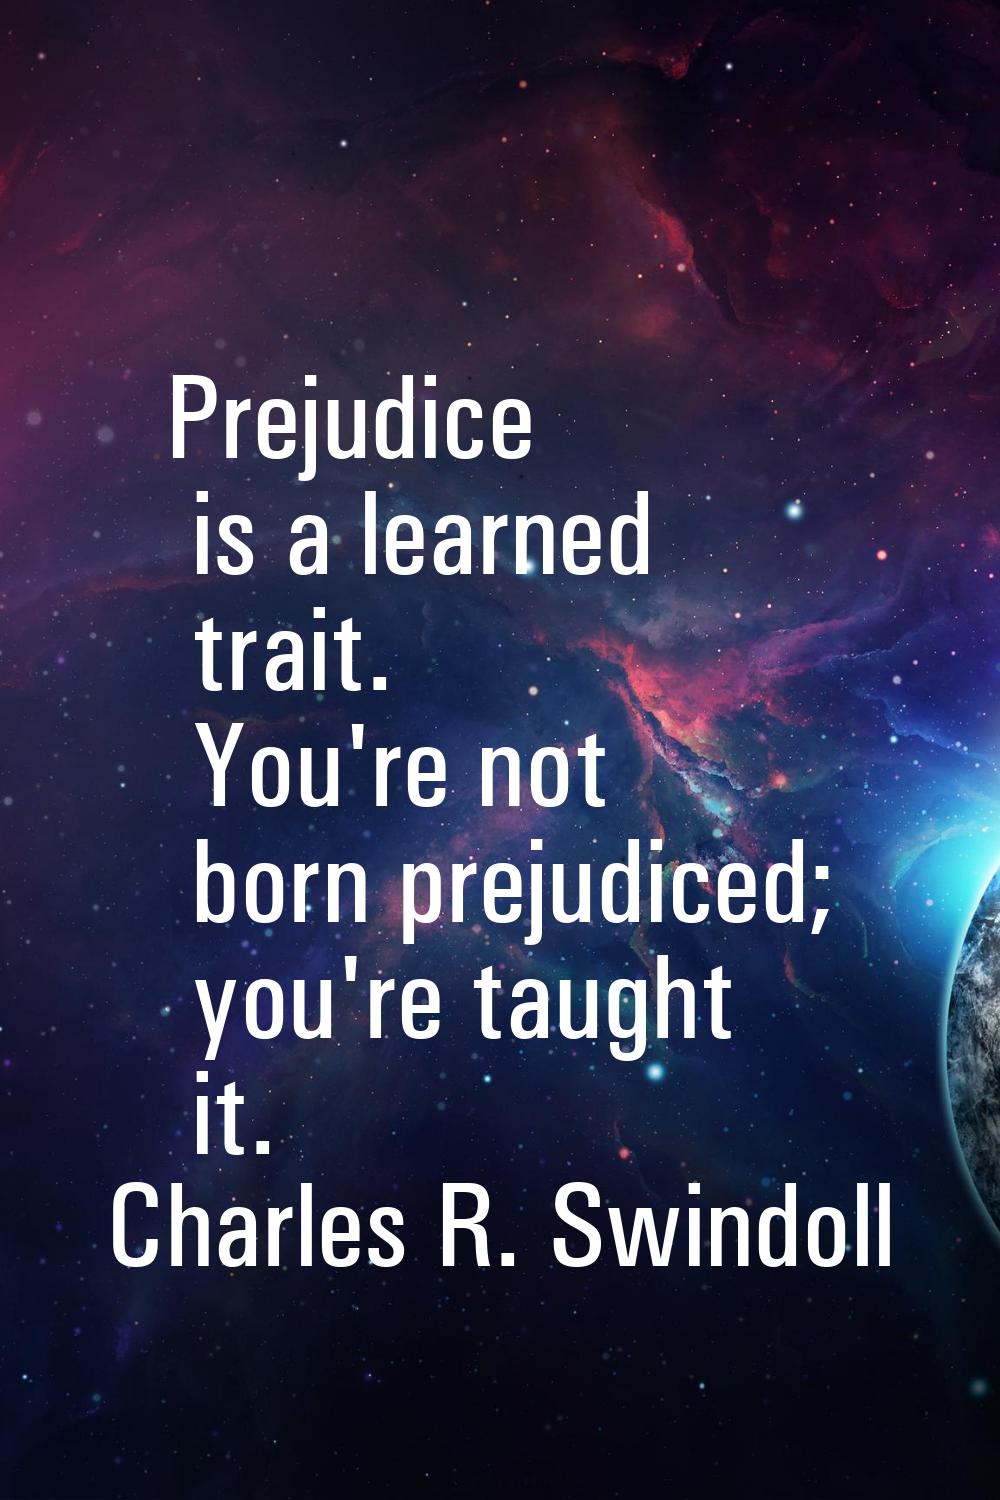 Prejudice is a learned trait. You're not born prejudiced; you're taught it.